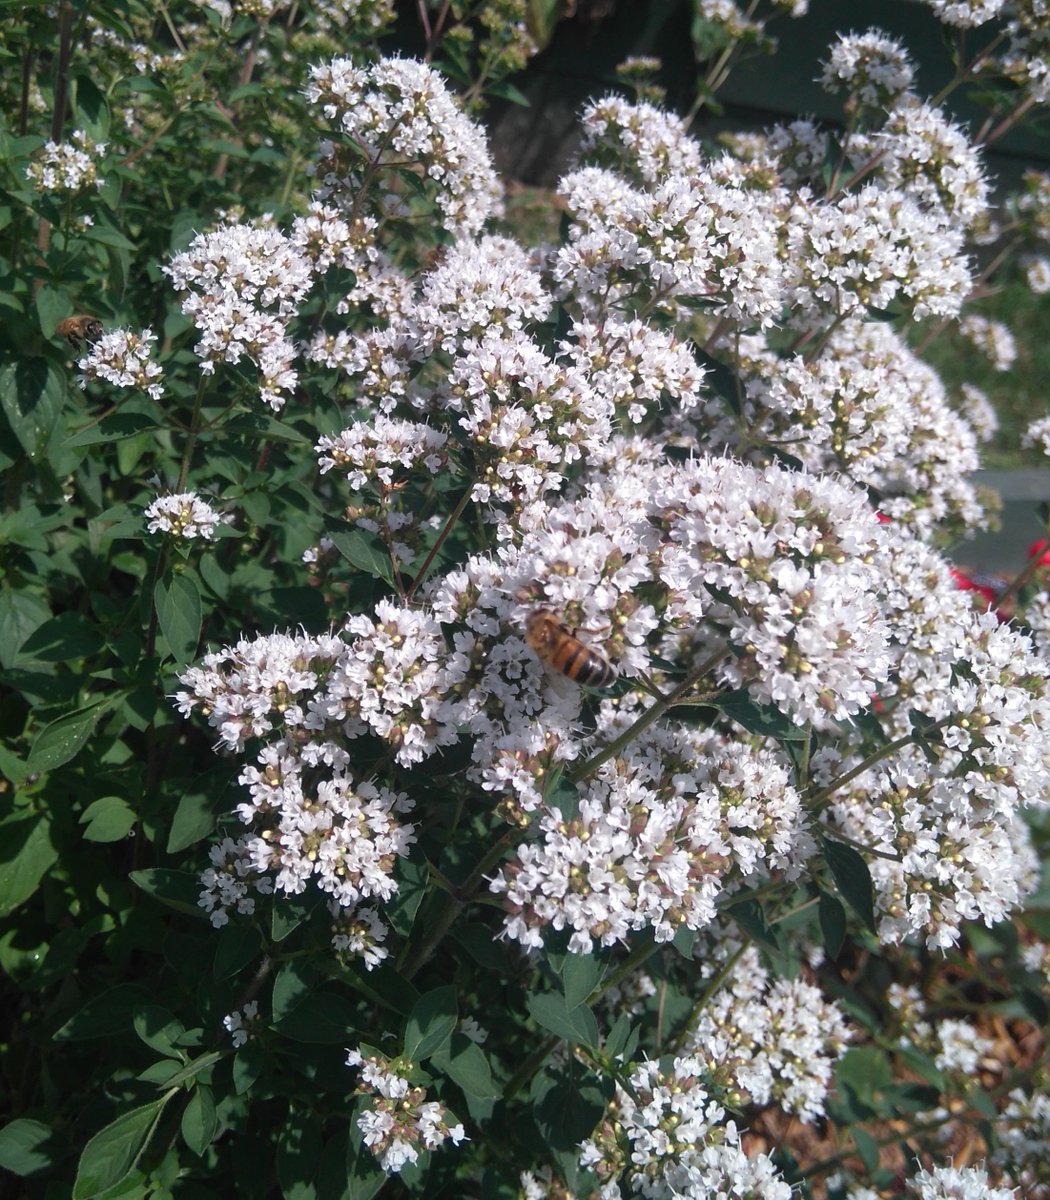 Our Cross Pollination Project has reported Marjoram as their pollinator plant of summer 2019! Plant marjoram for #bees #pollinators #beesneeds #kentyearofgreenaction